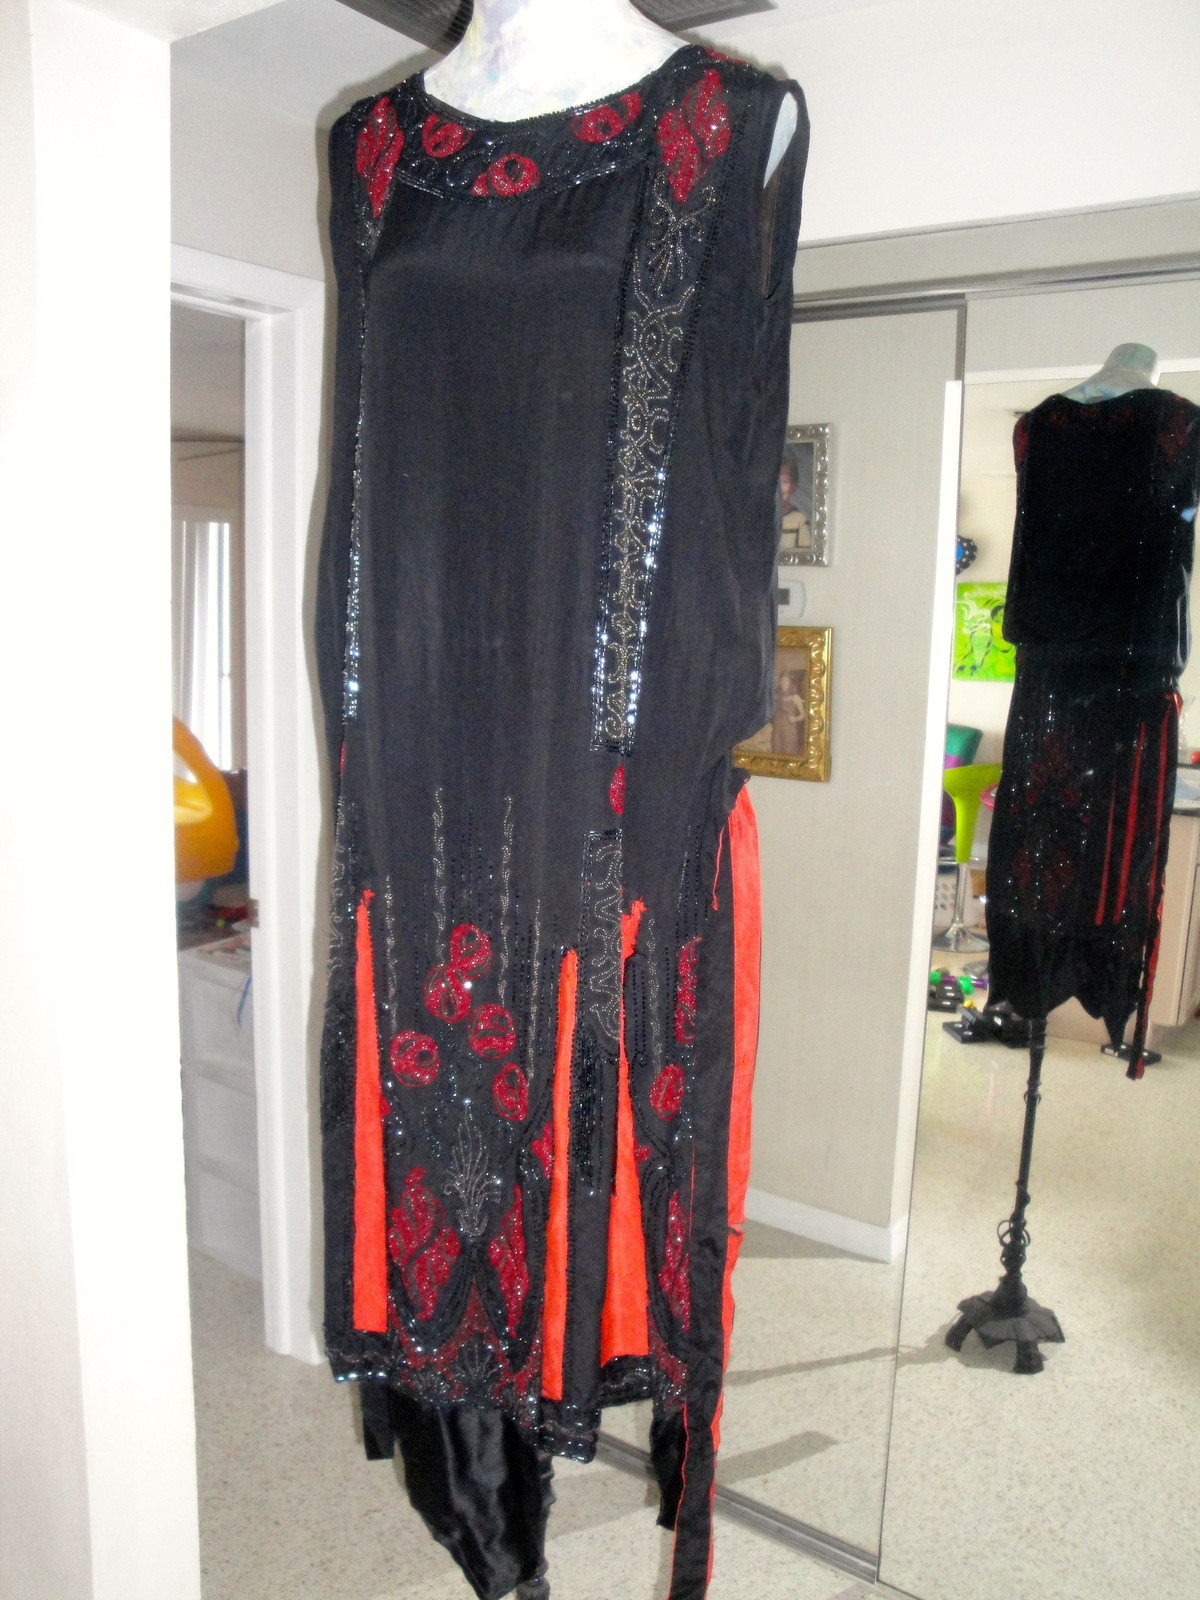 All The Pretty Dresses: 1920's Black and Red Dress